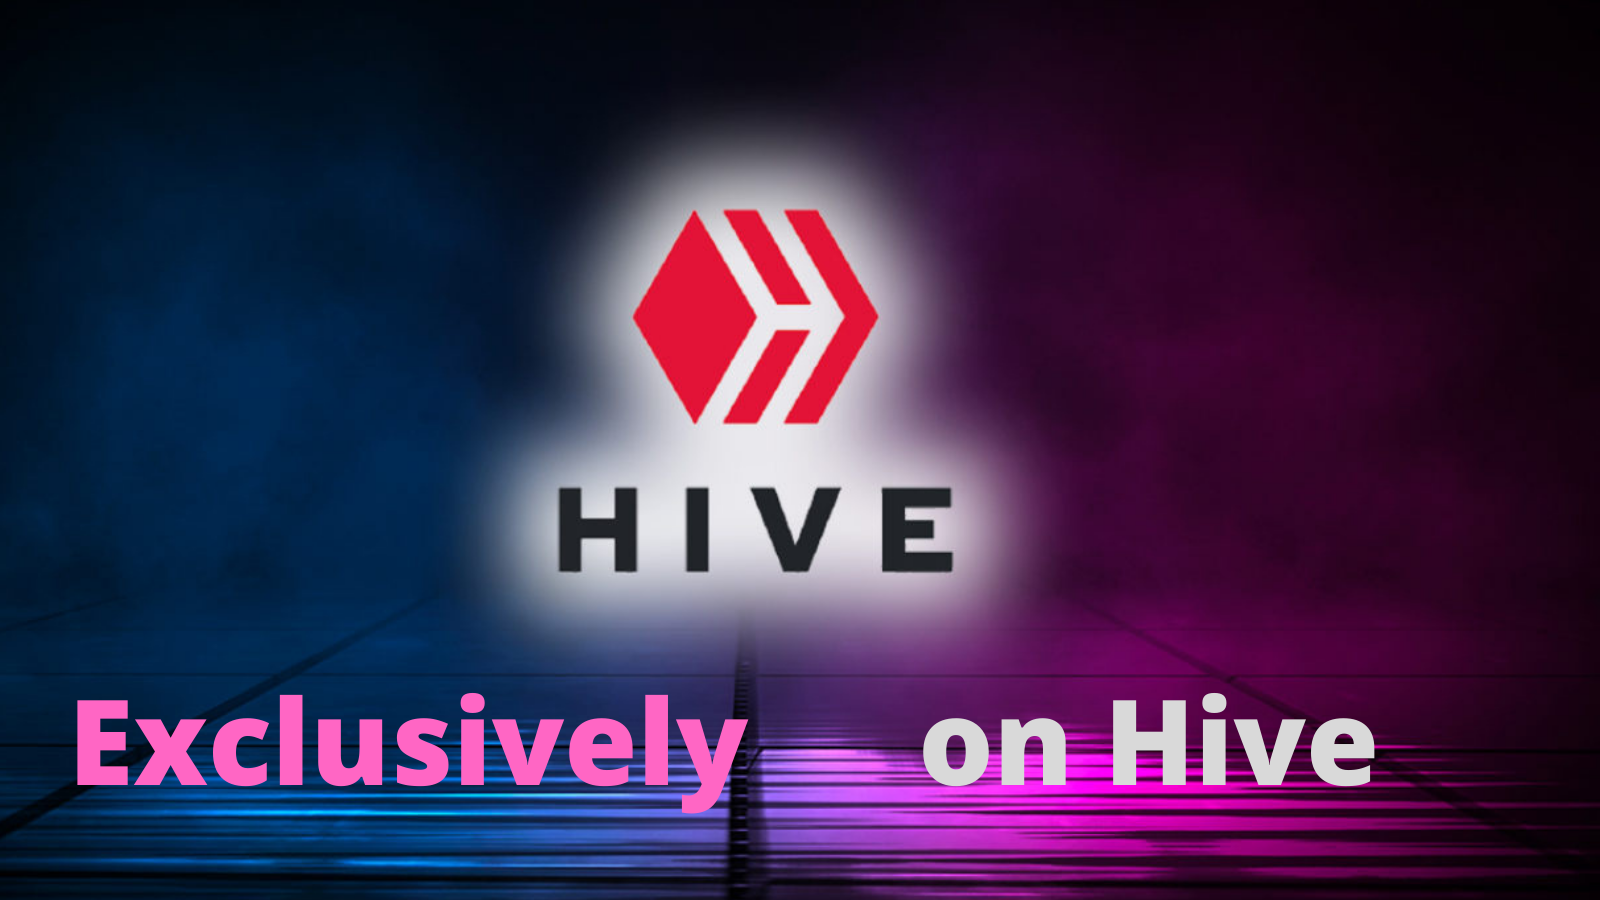 Exclusively decentralized crypto blogging on hive.png